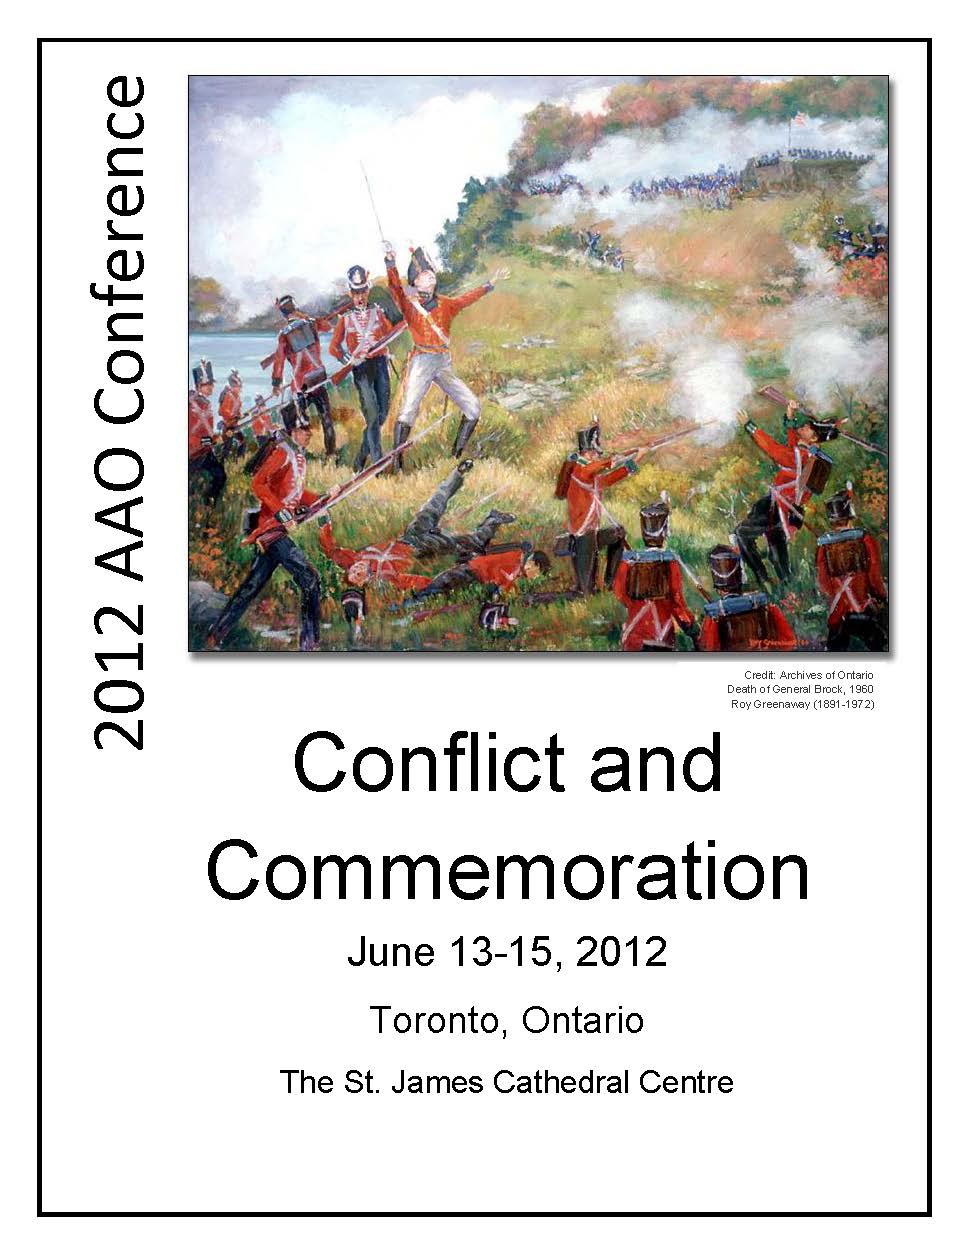 2012 AAO Conference. Conflict and commemoration.